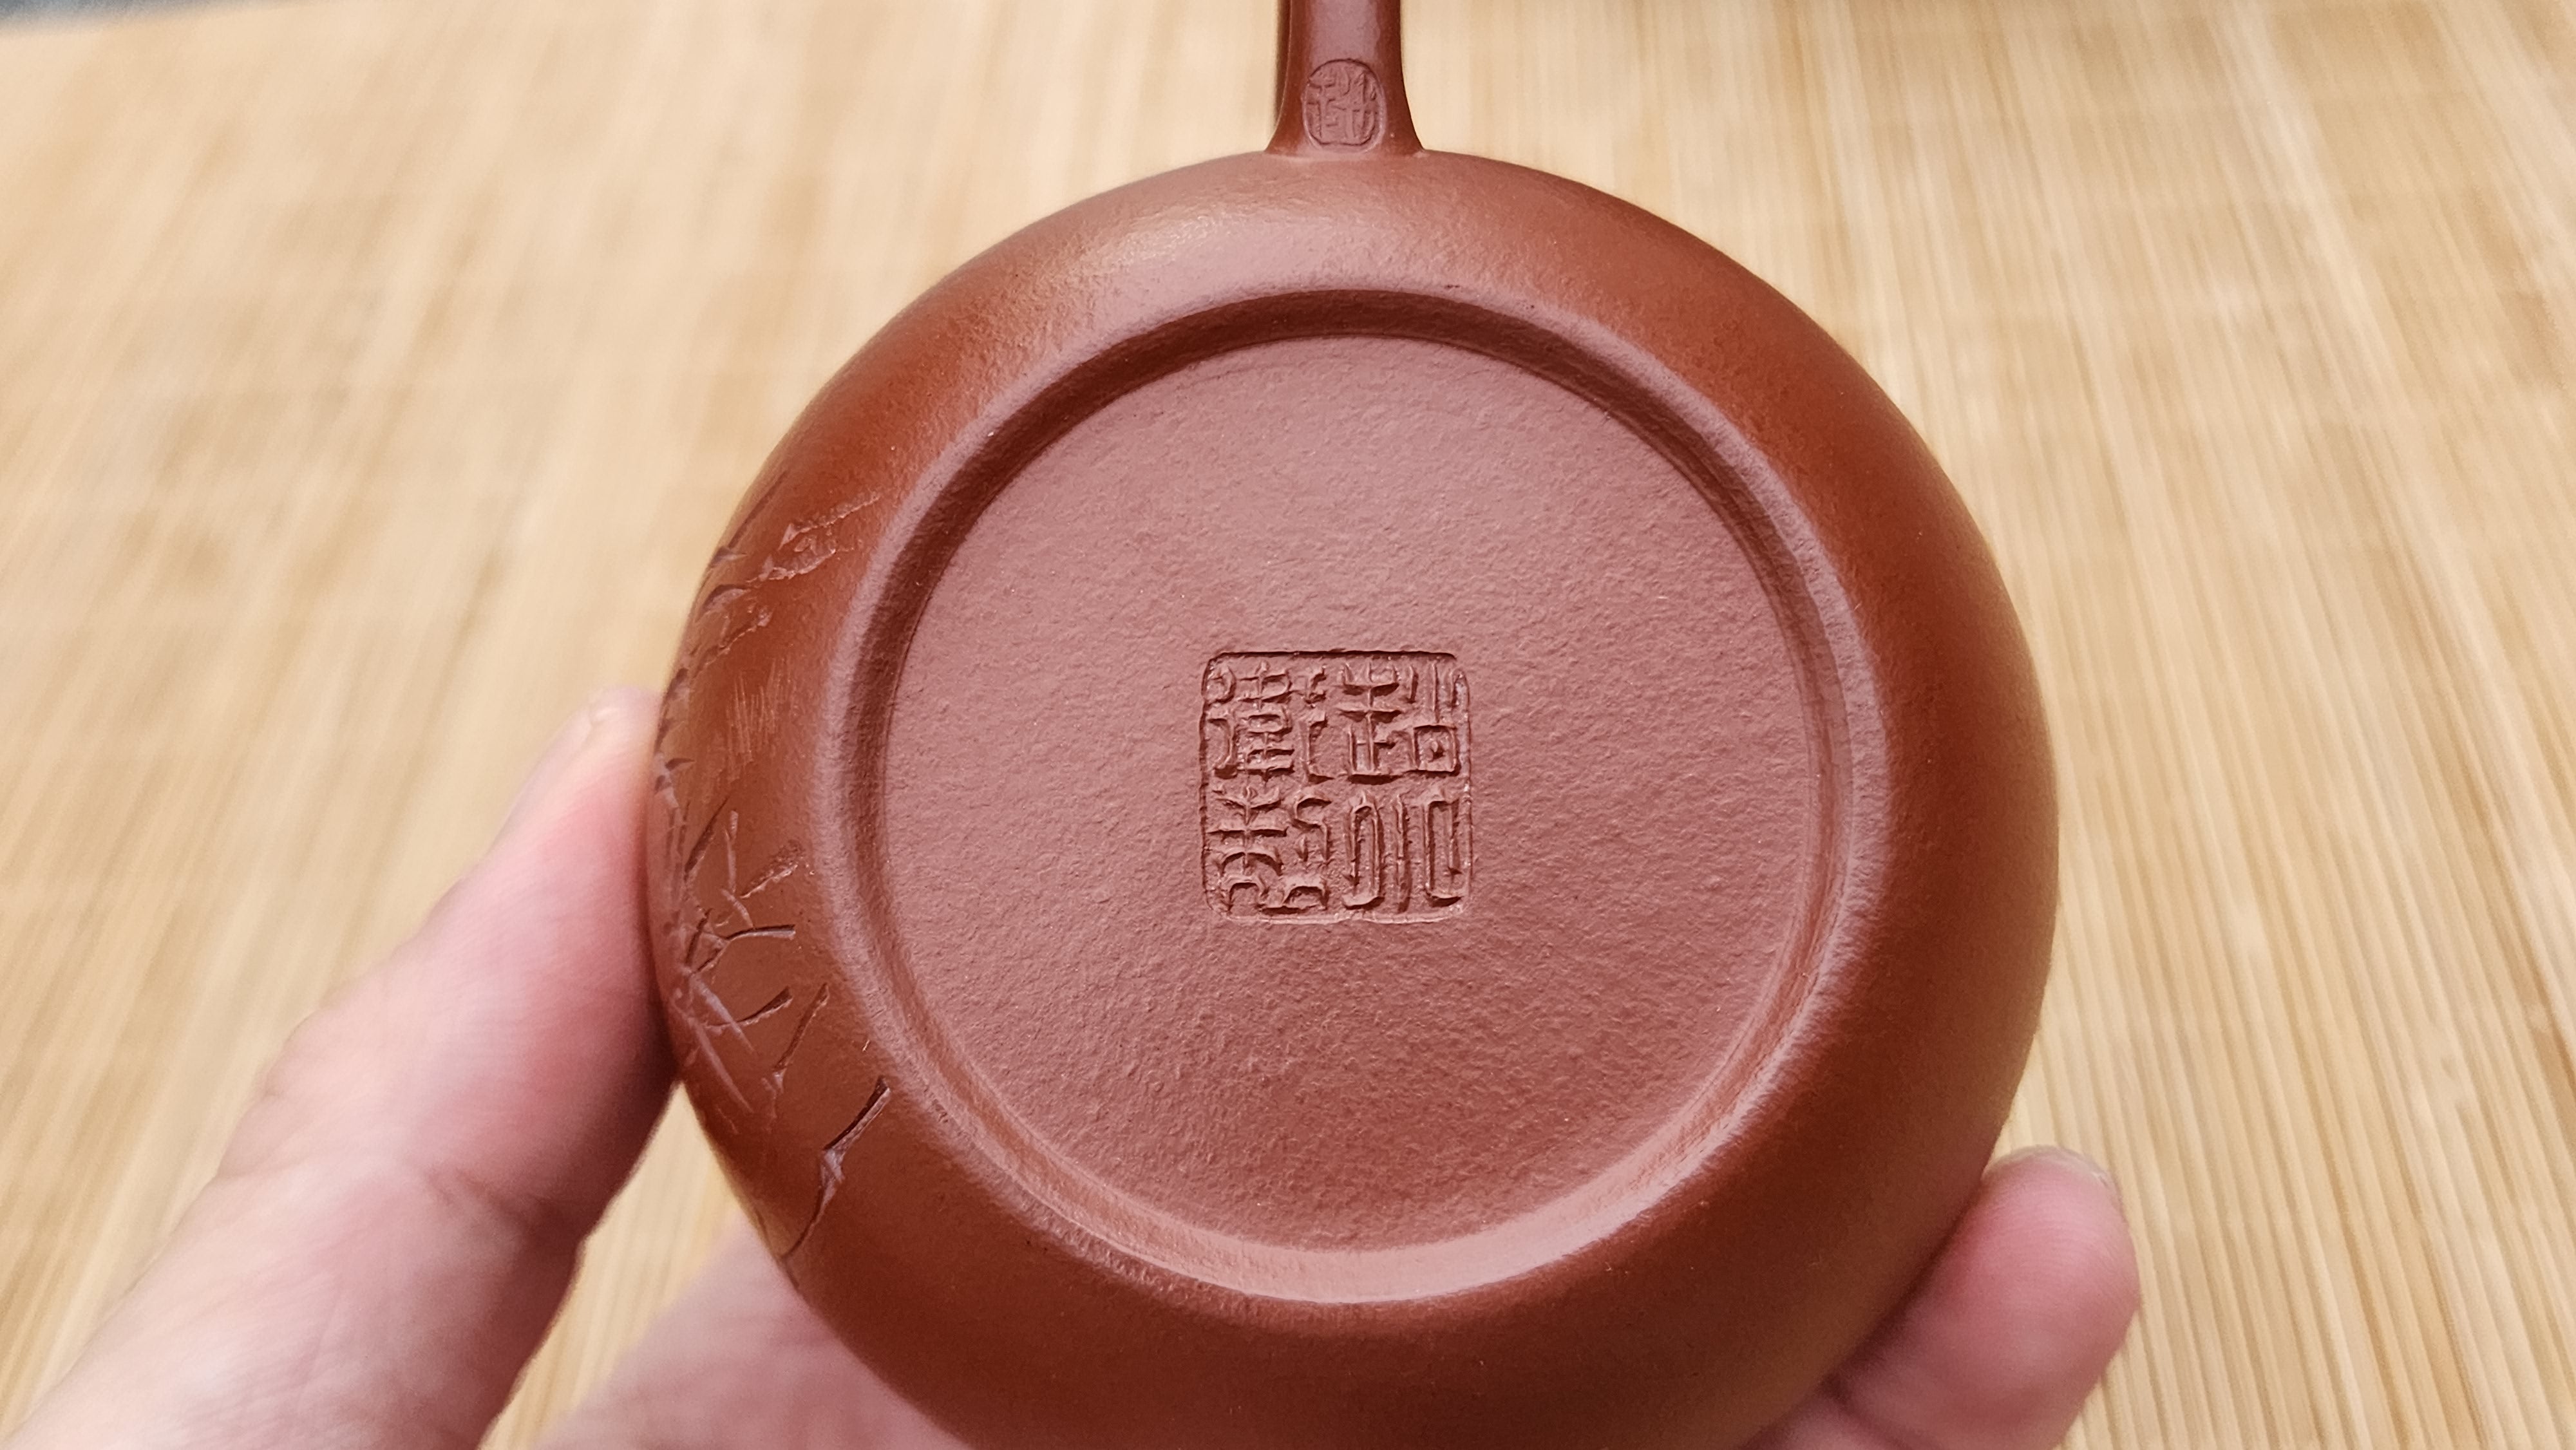 Li Xing 梨形, XiaoMeiYao ZhuNi 小煤窑朱泥, by our collaborative Craftsman Zhao Xiao Wei 赵小卫。Bamboo engraving and Calligraphy inscription by L4 Assoc Master Artist Xing Su 行素。146ml.